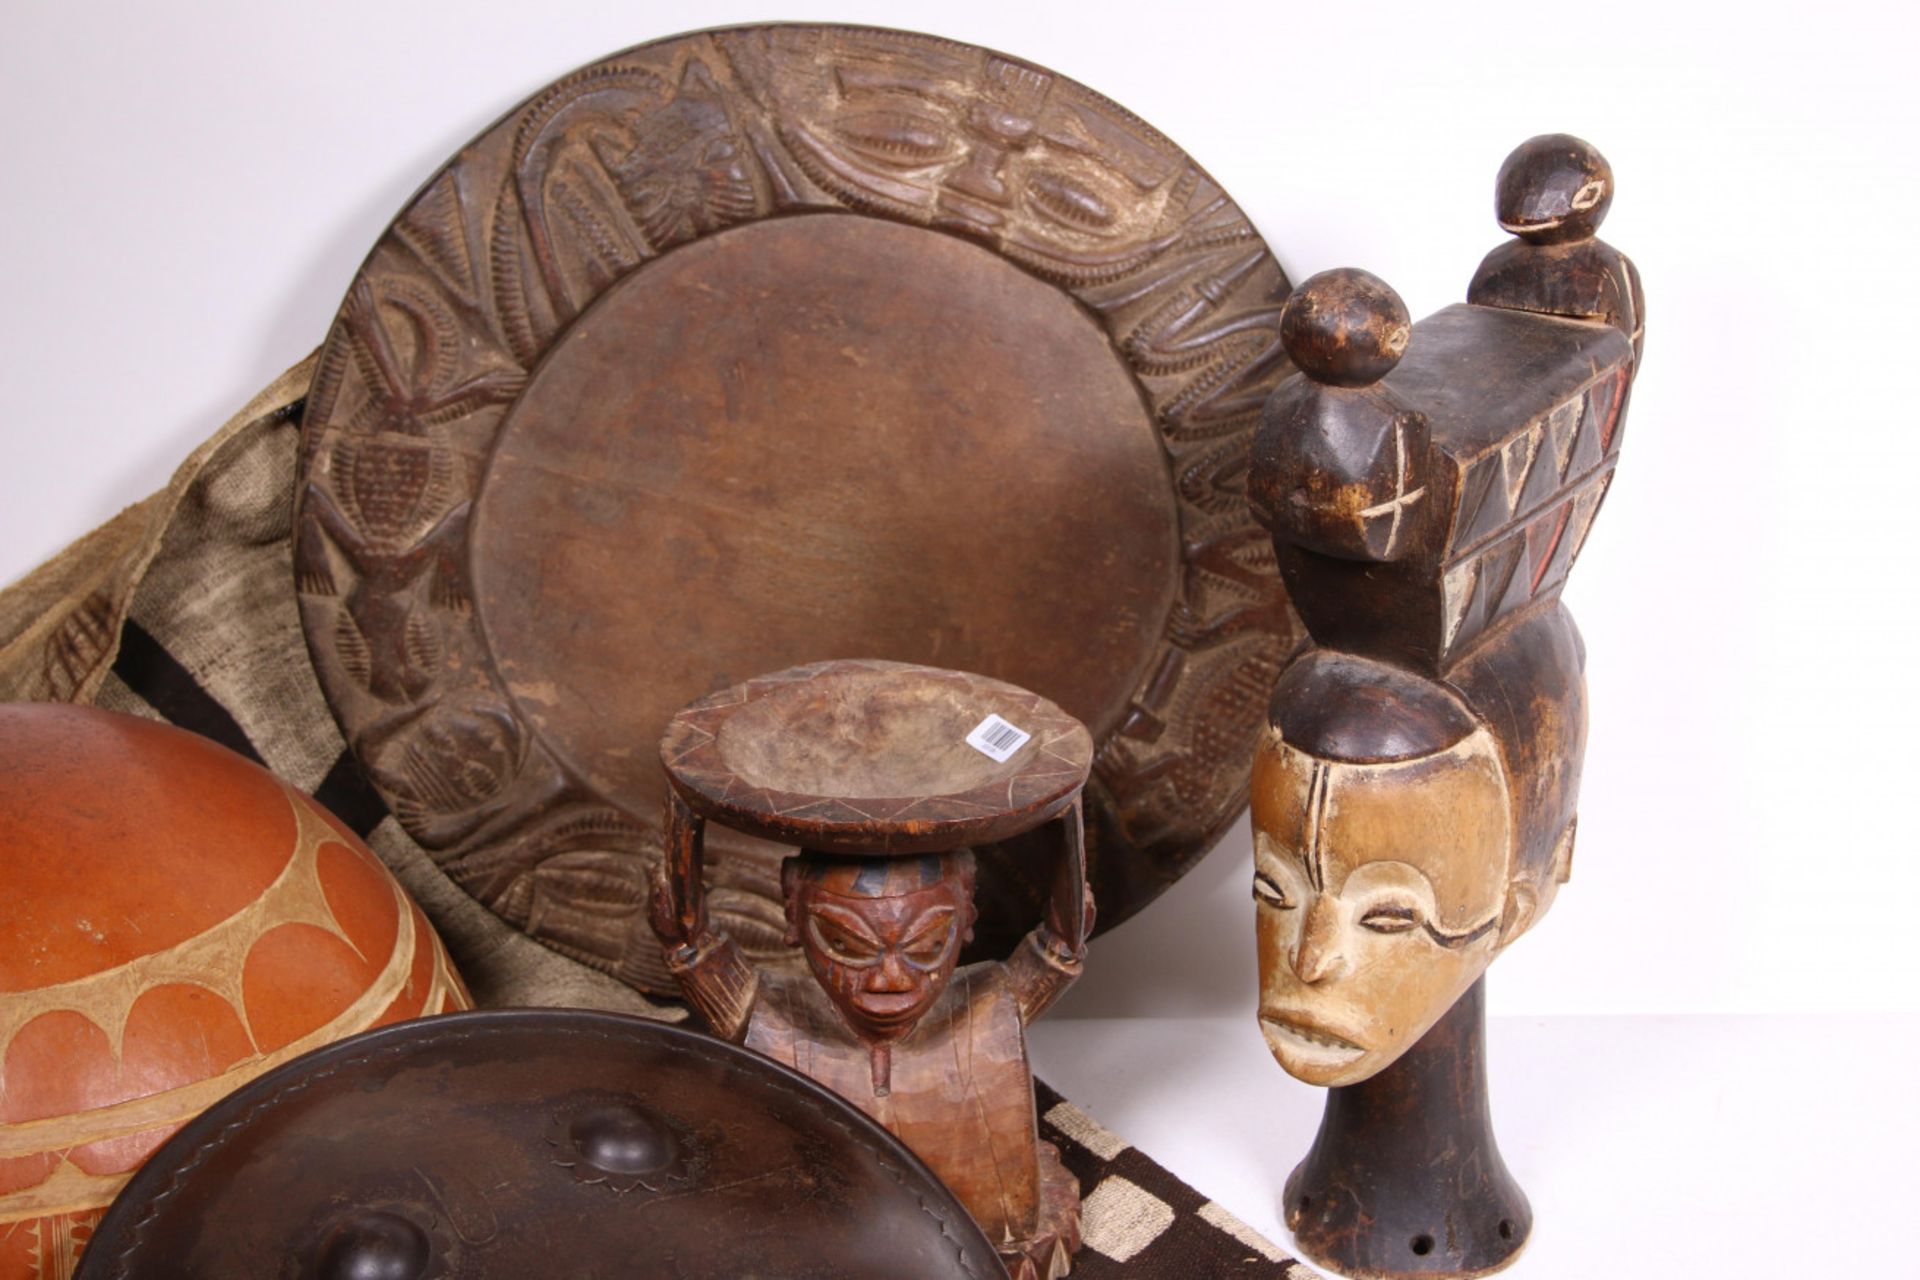 Nigeria, Yoruba, wooden Ifa dish decorated with carved faces.and a neckrest-like bowl